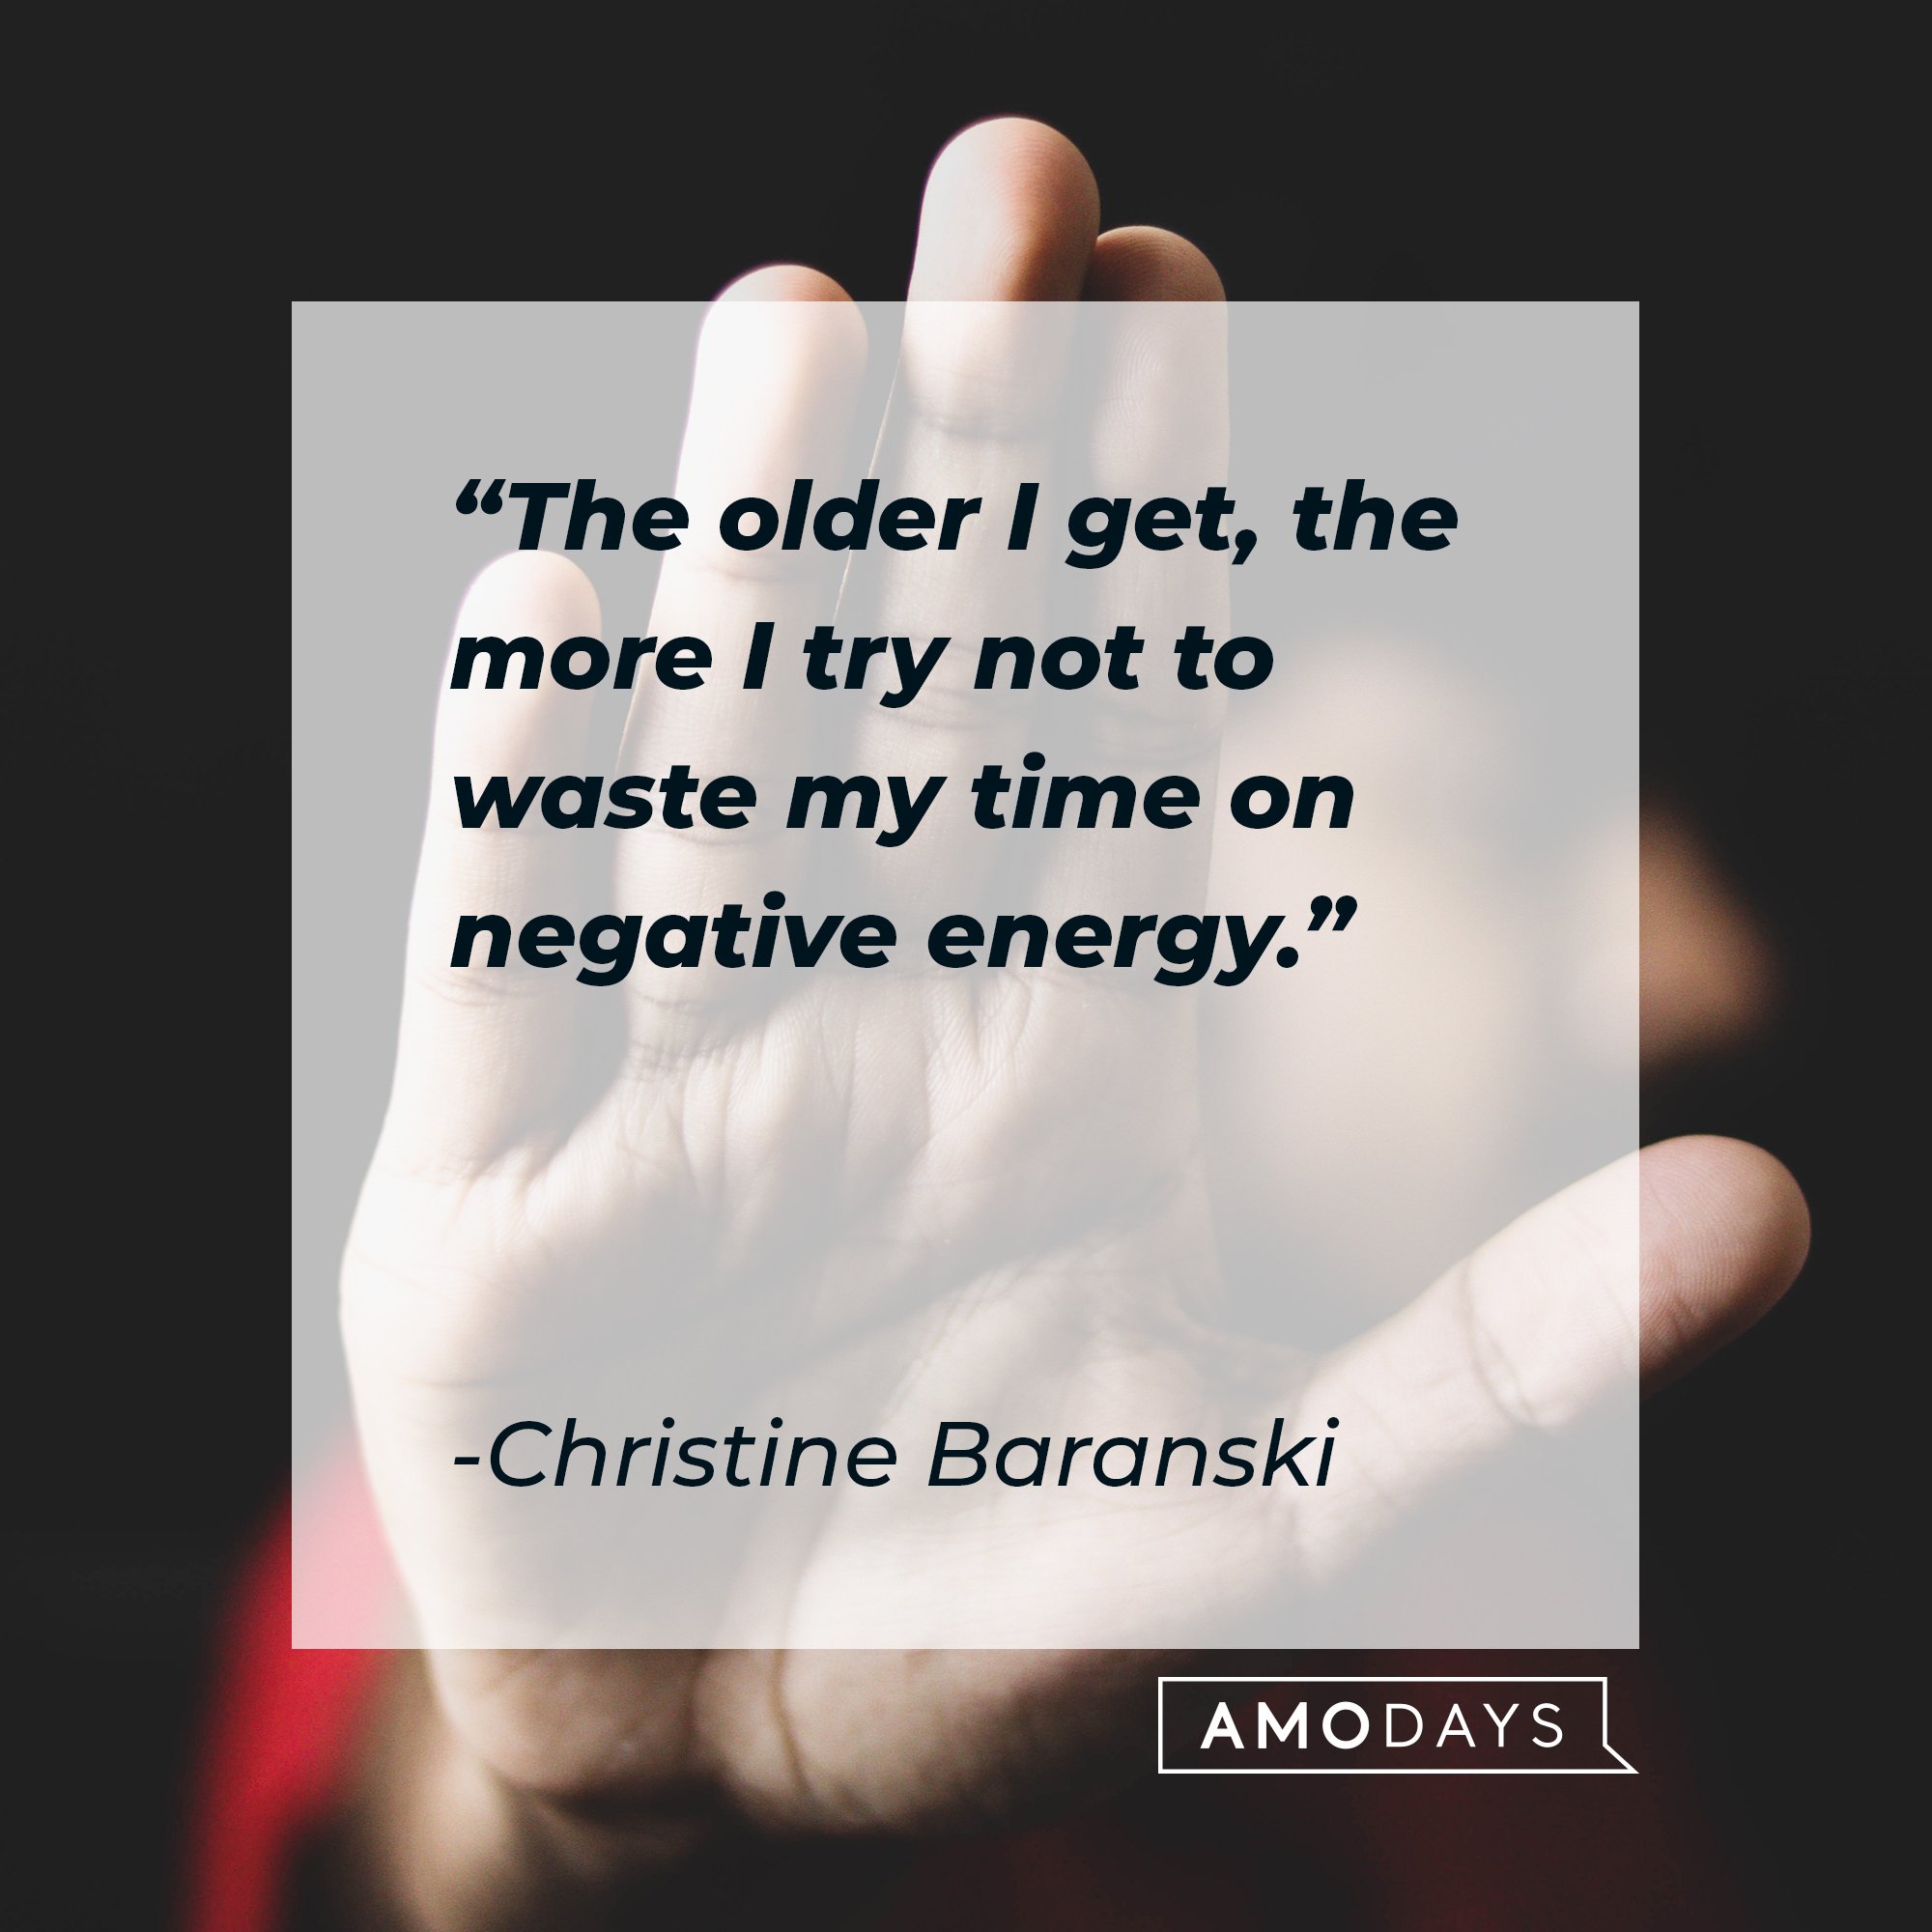 Christine Baranski’s quote: "The older I get, the more I try not to waste my time on negative energy." | Image: AmoDays 